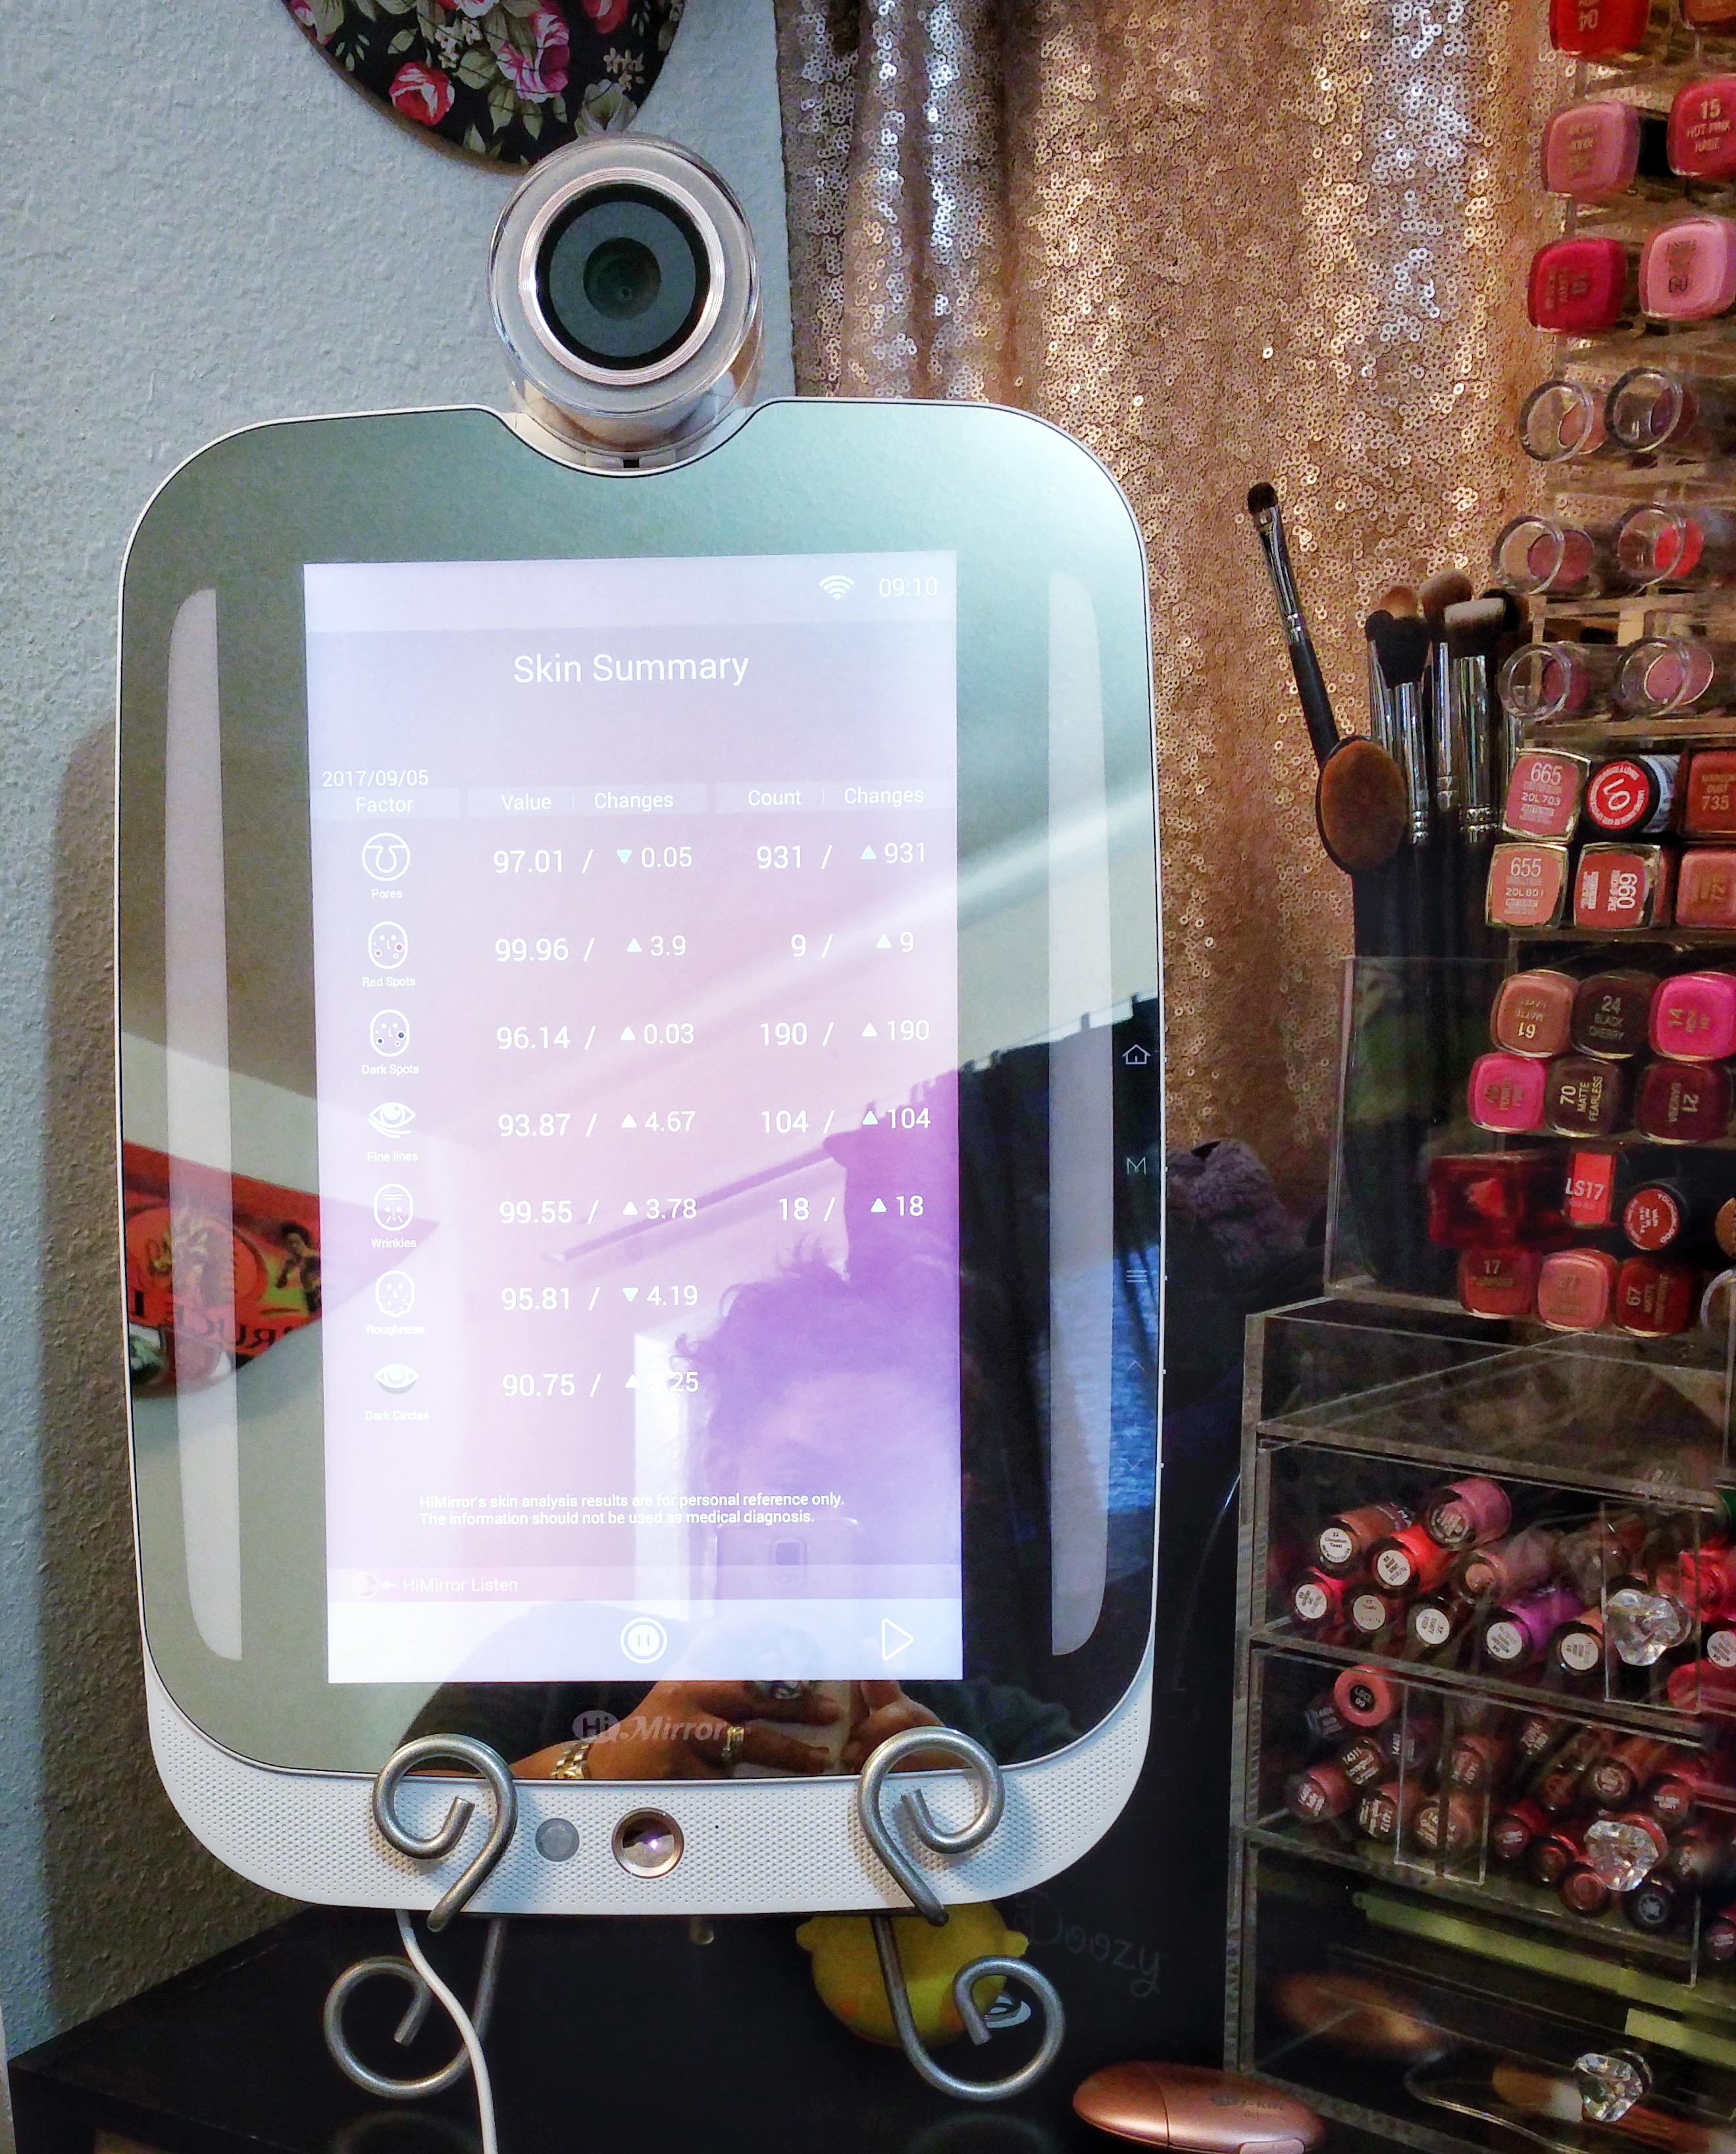 HIMirror Plus, review, beauty, smarter beauty, innovative, beauty goals, personal beauty system, smart beauty mirror, beauty mirror, skin analysis, face recognition, skincare tips, at-home beauty consultant, skin care, skincare, makeup light, beauty review, skincare review, beauty technology,